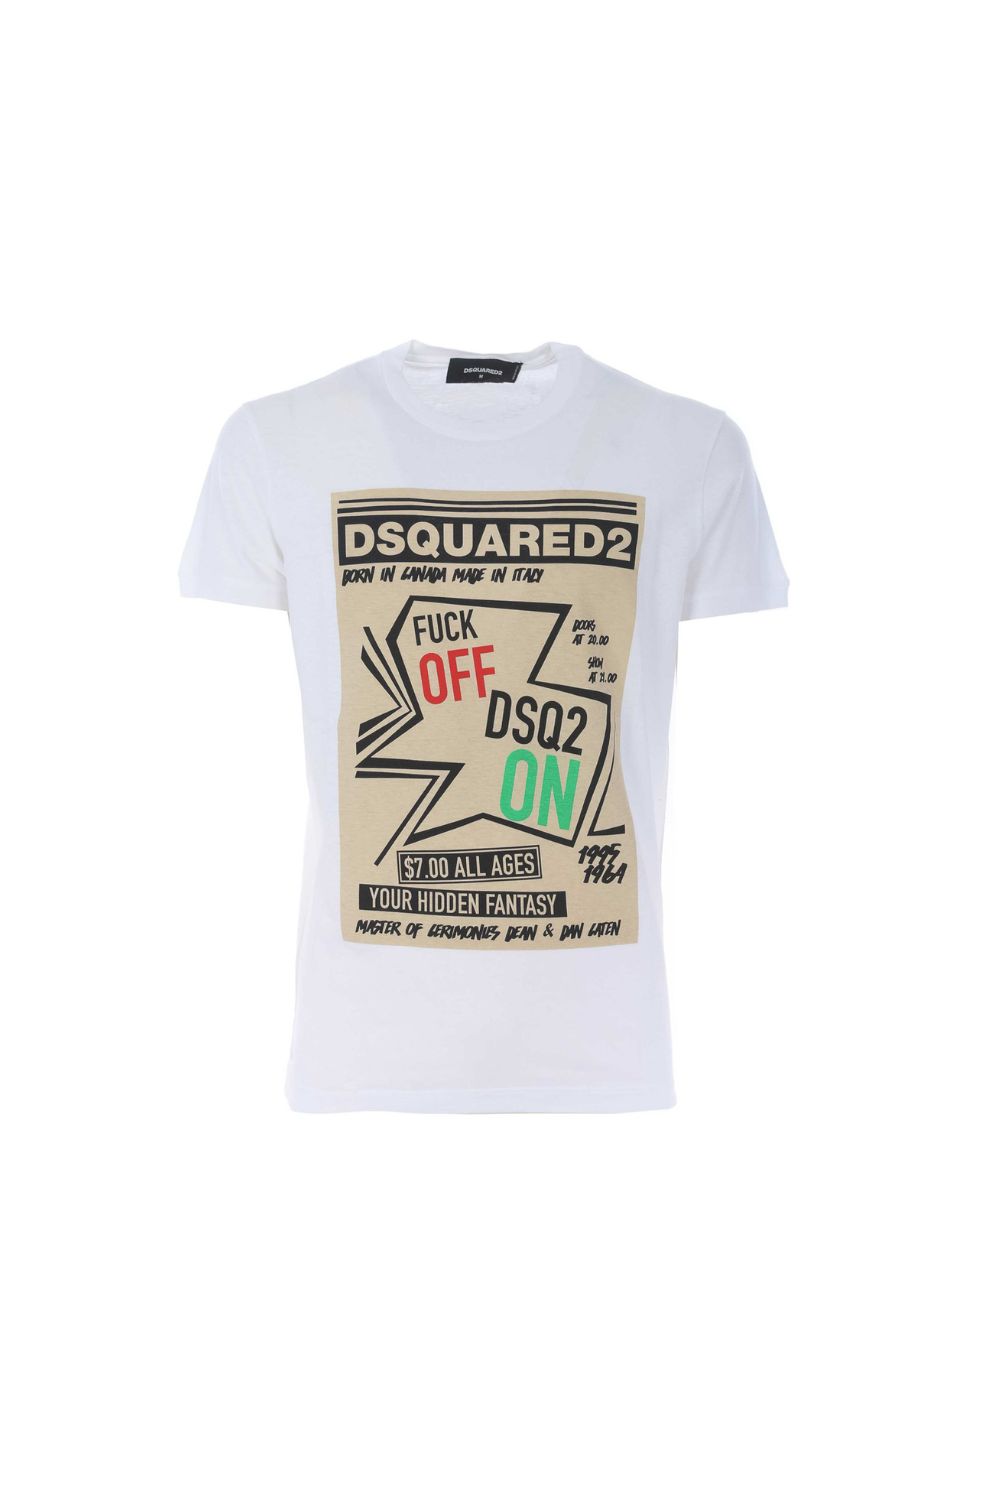 Dsquared2 t shirt “F**K Off”in jersey